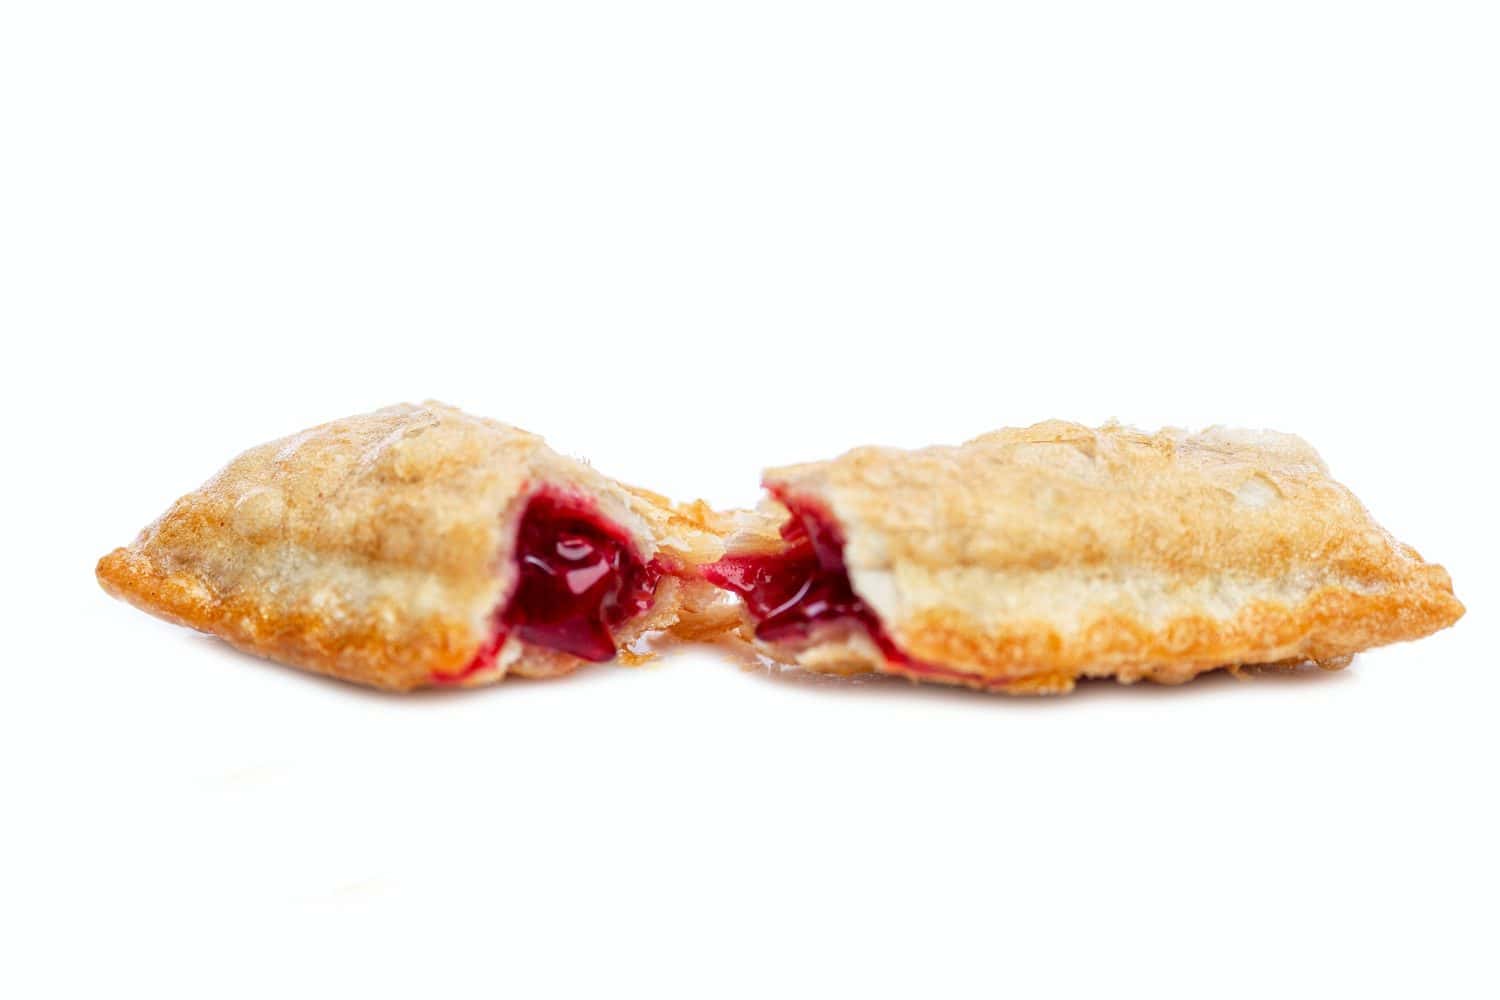 Fried sweet pie of a popular fast food restaurant chain. Delicious garbage food. Isolated on a white background. Selective focus. Close-up.